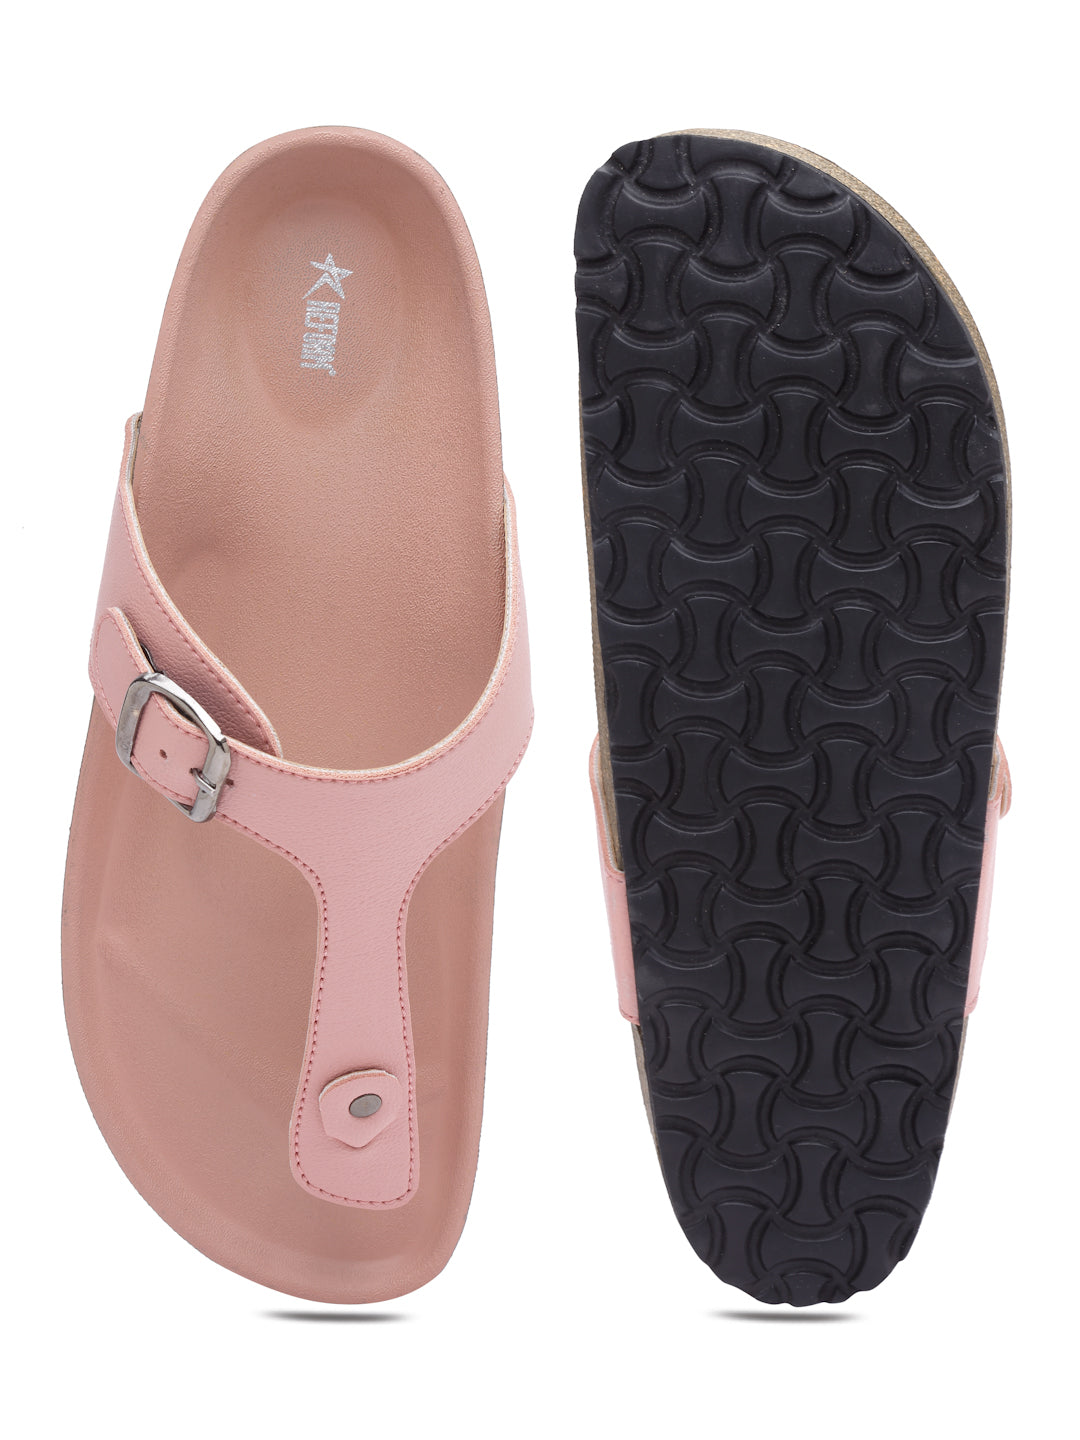 Women's Outdoor Stylish Pink Synthetic Leather Casual Sandal